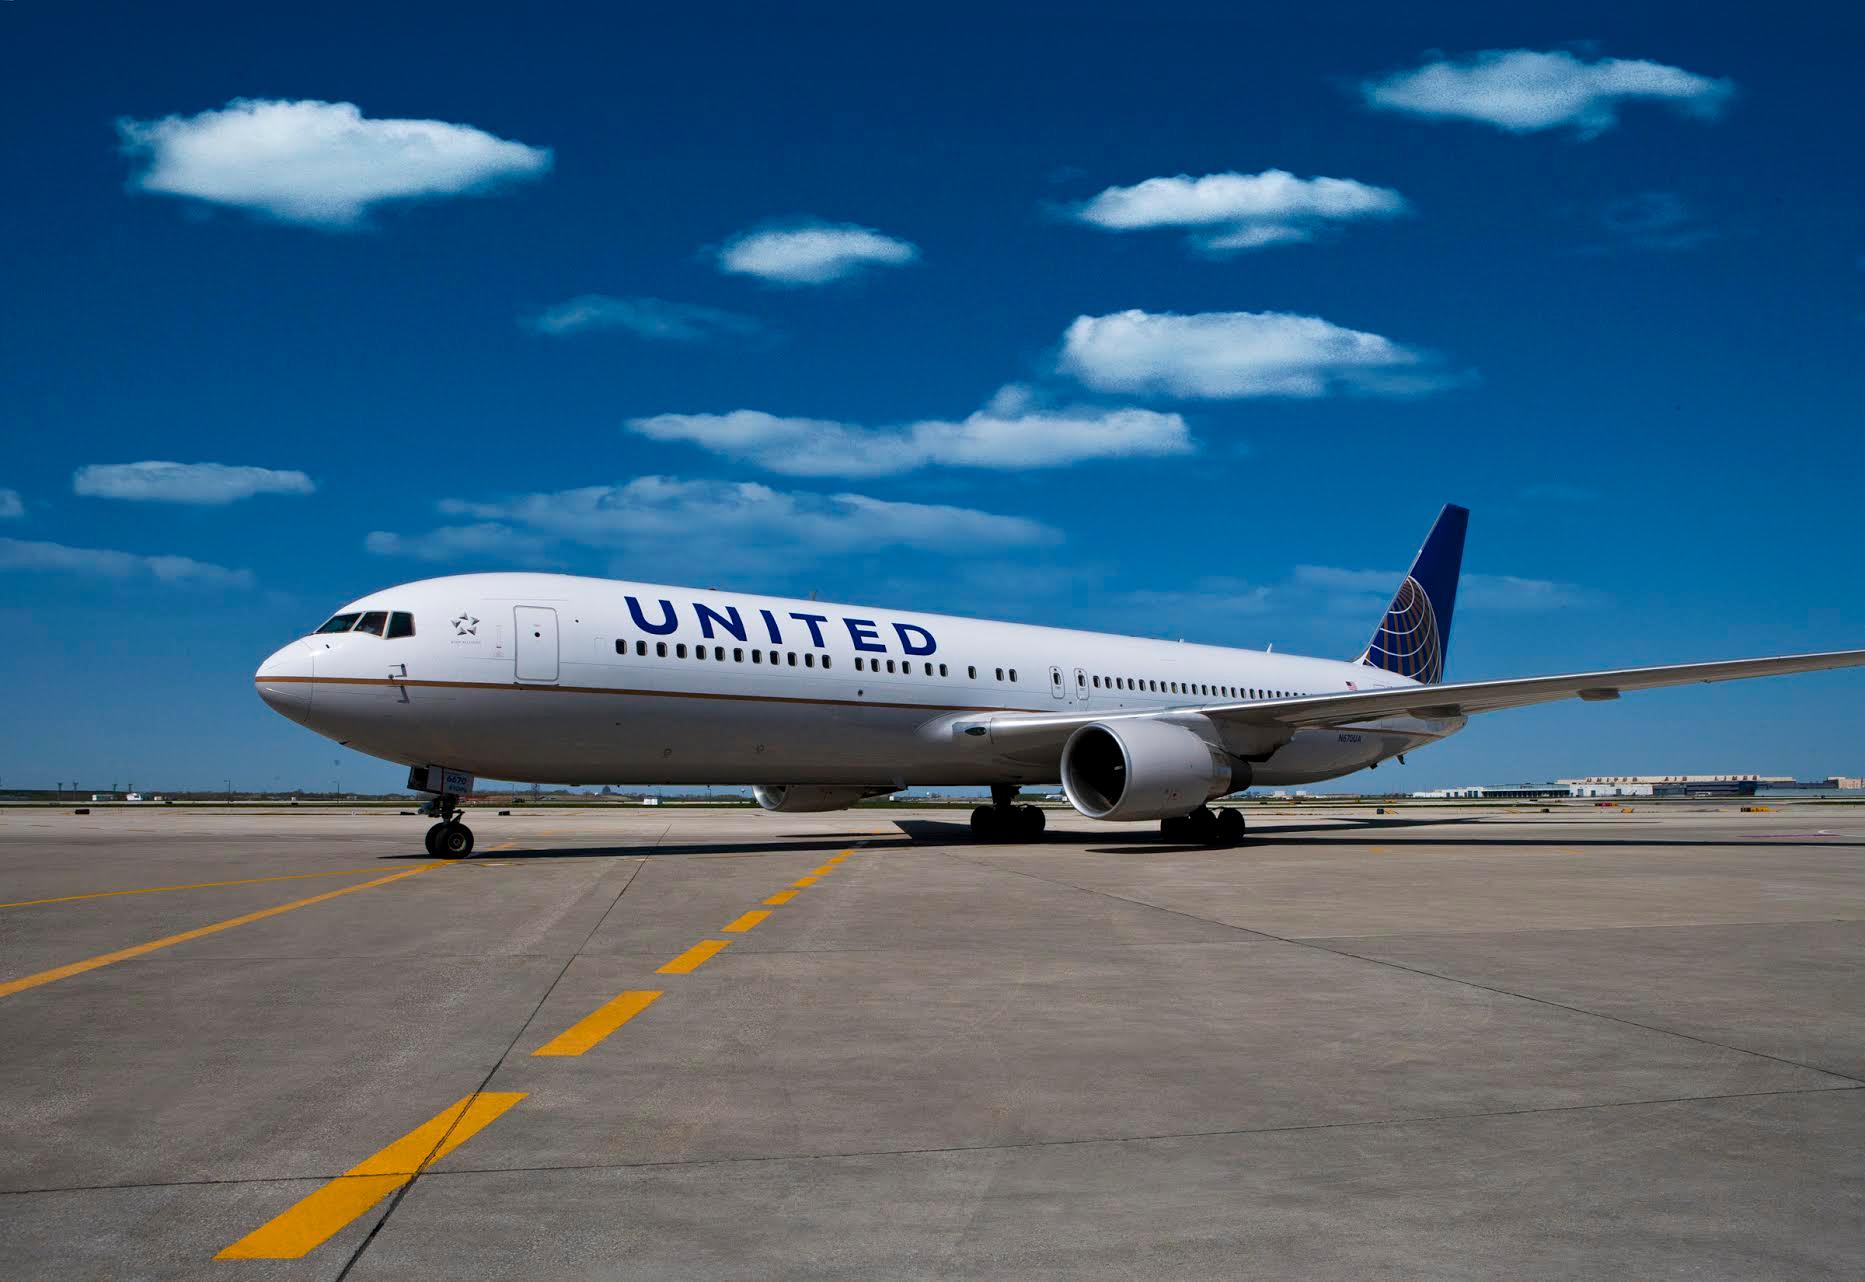 is it cheaper to book on the united airline app?